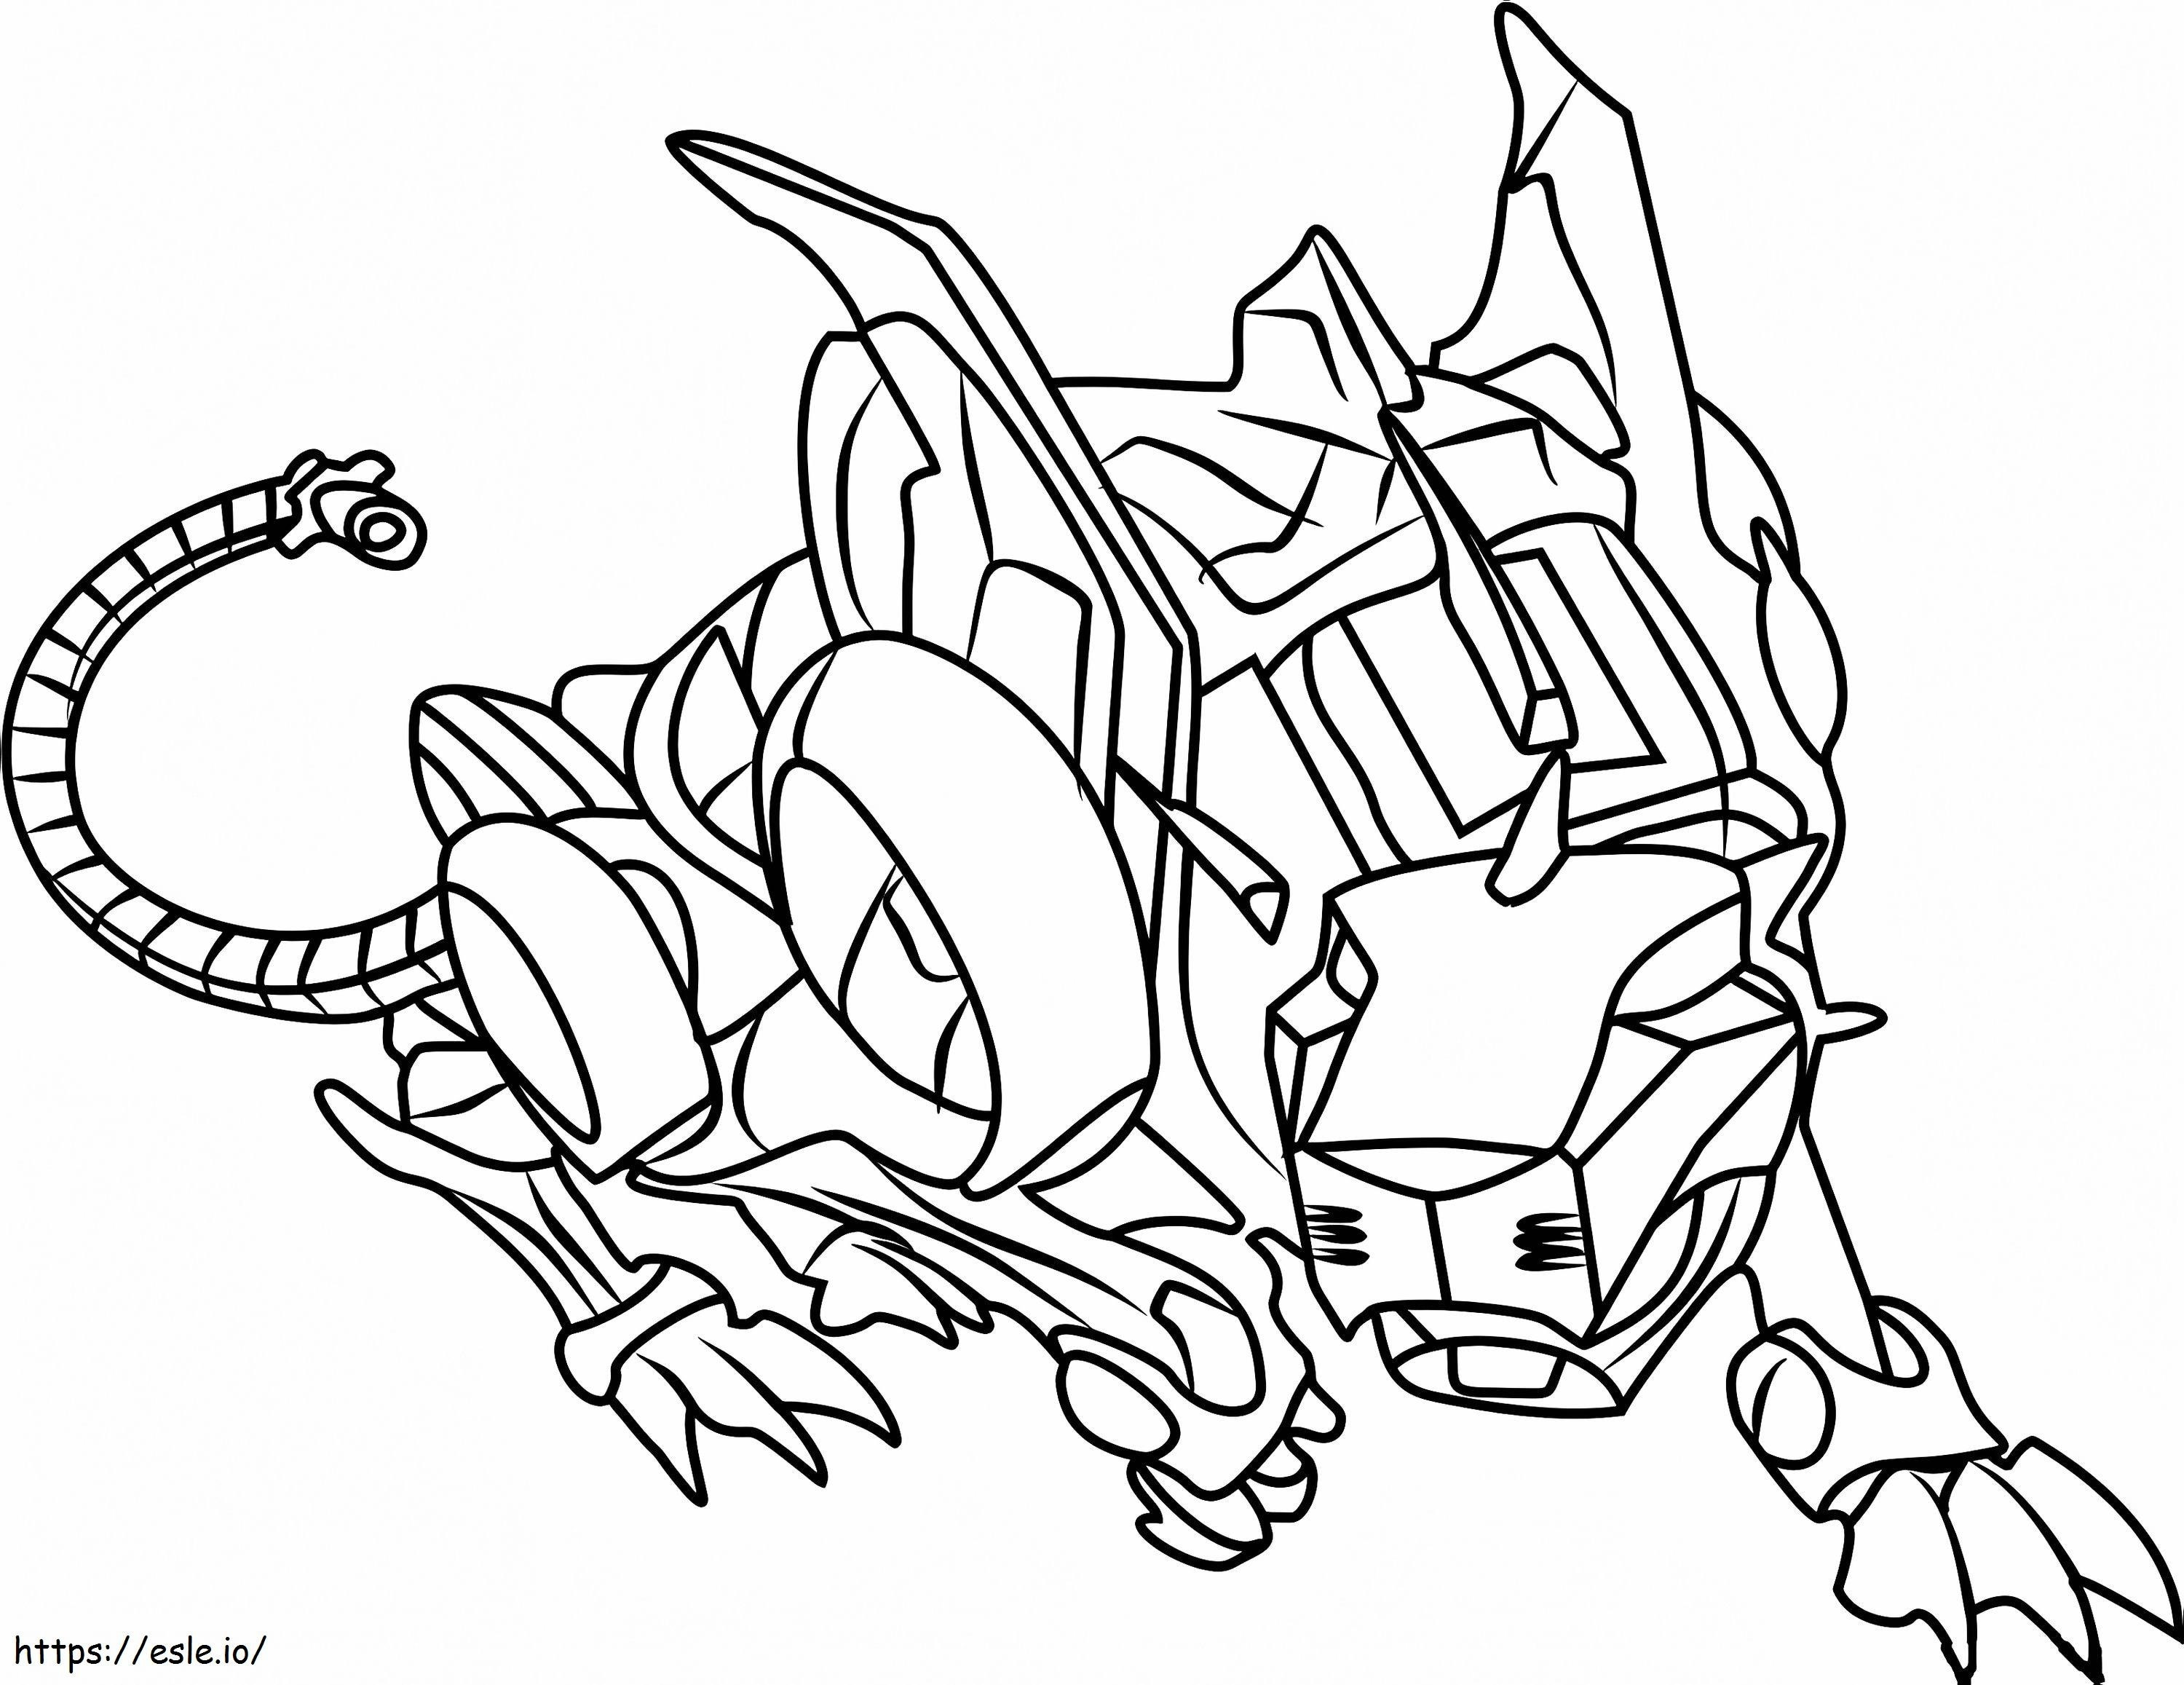 Red Lion coloring page